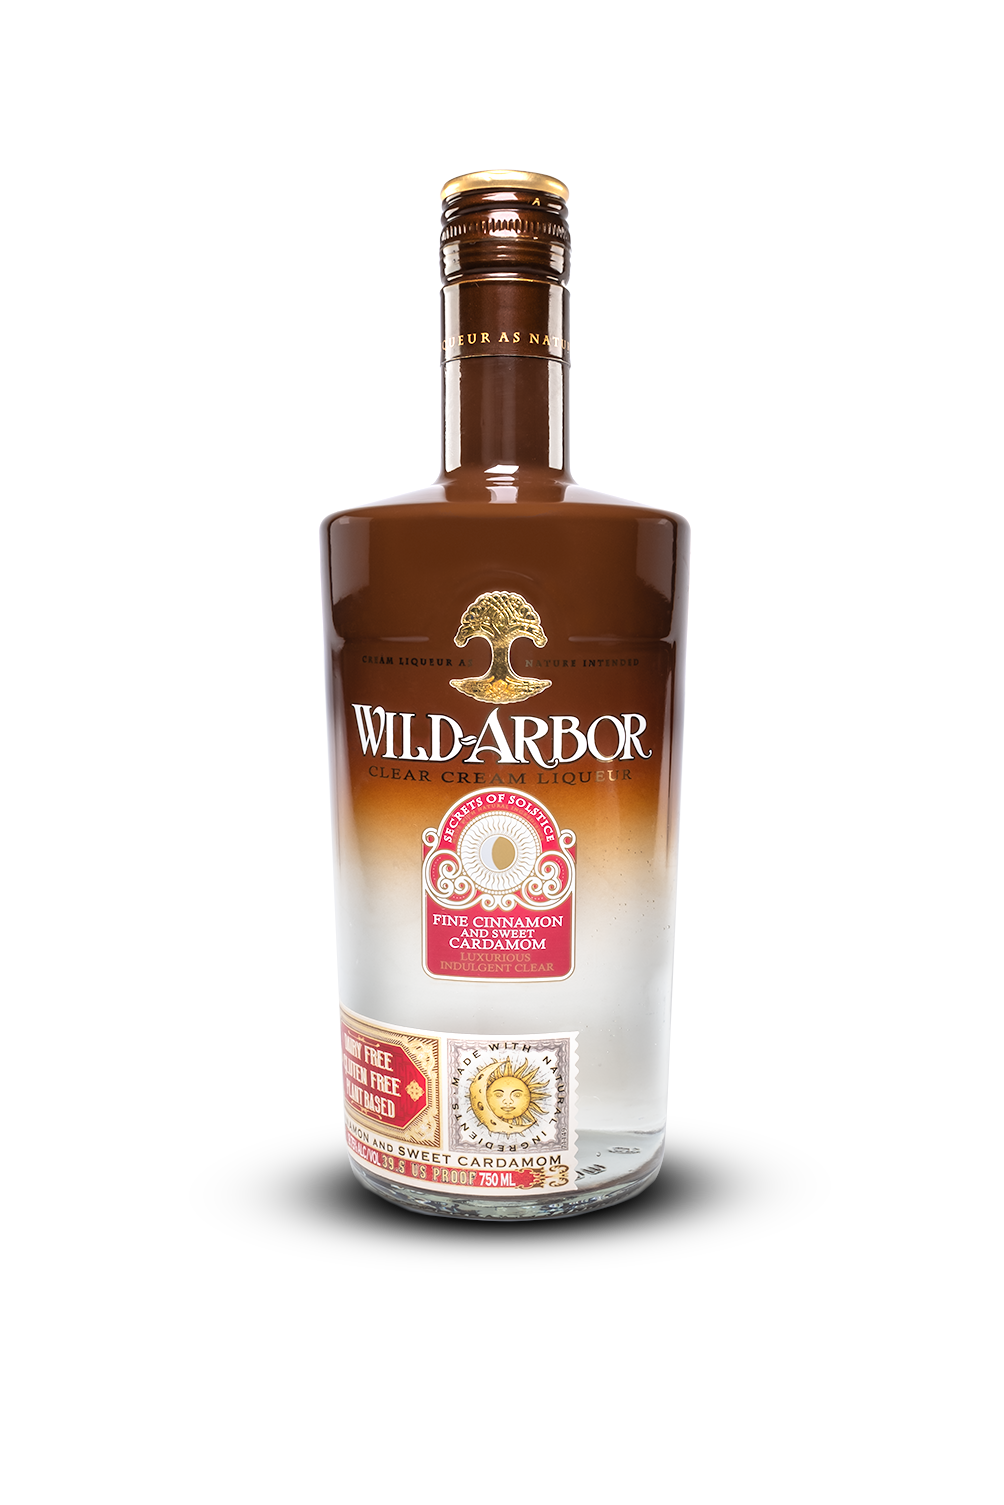 Wild-Arbor with Cardamom and Cinnamon: Secrets of Solstice 75cl